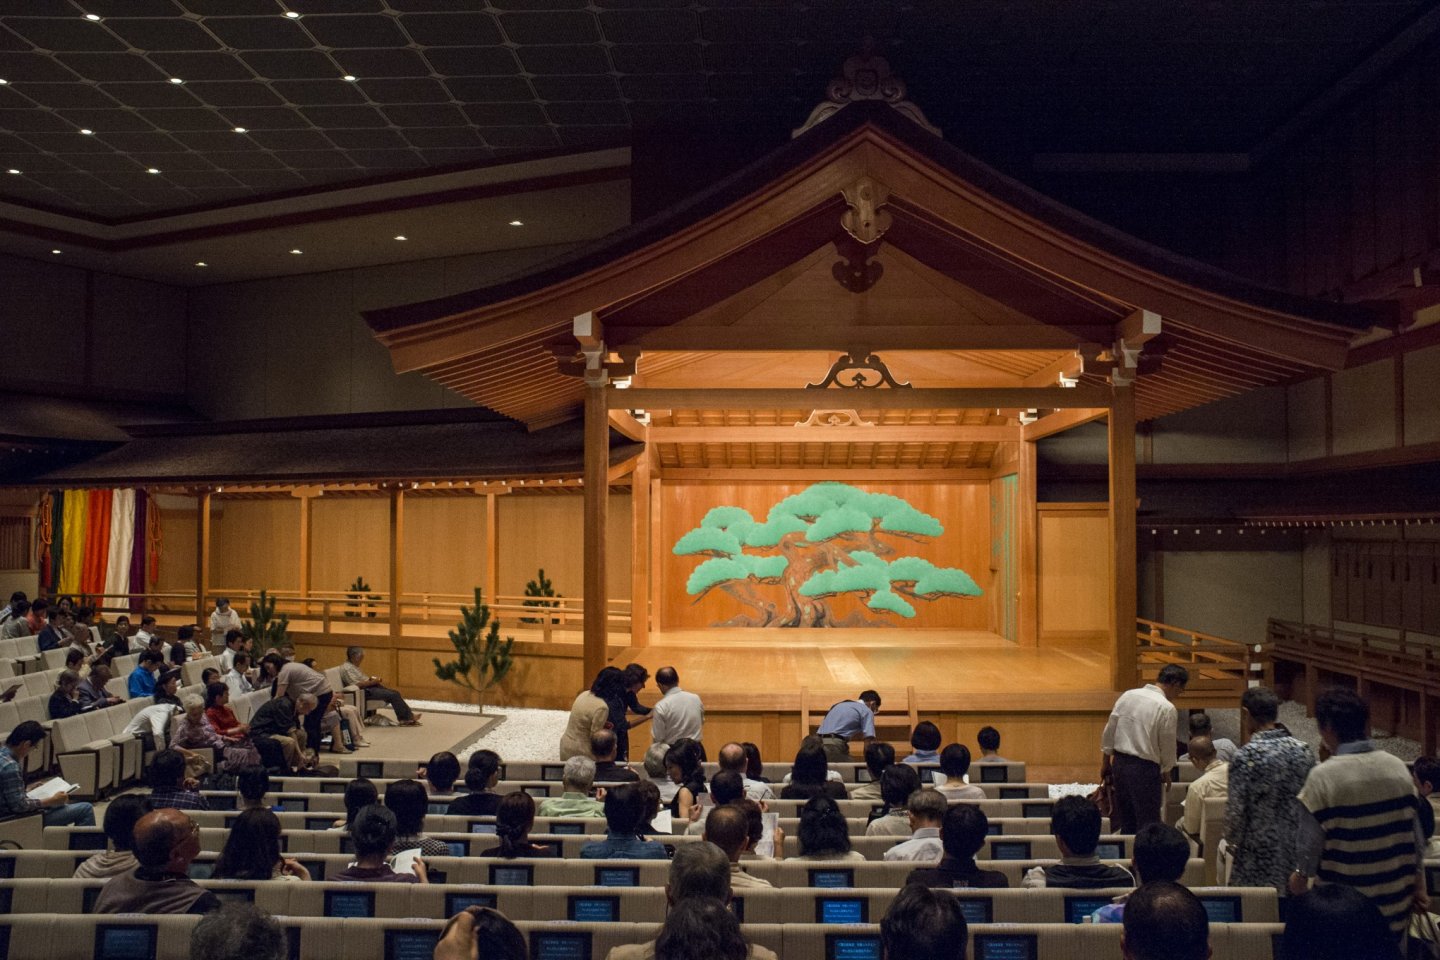 Inside the 591-seater auditorium with the beautiful 'Noh stage' on display